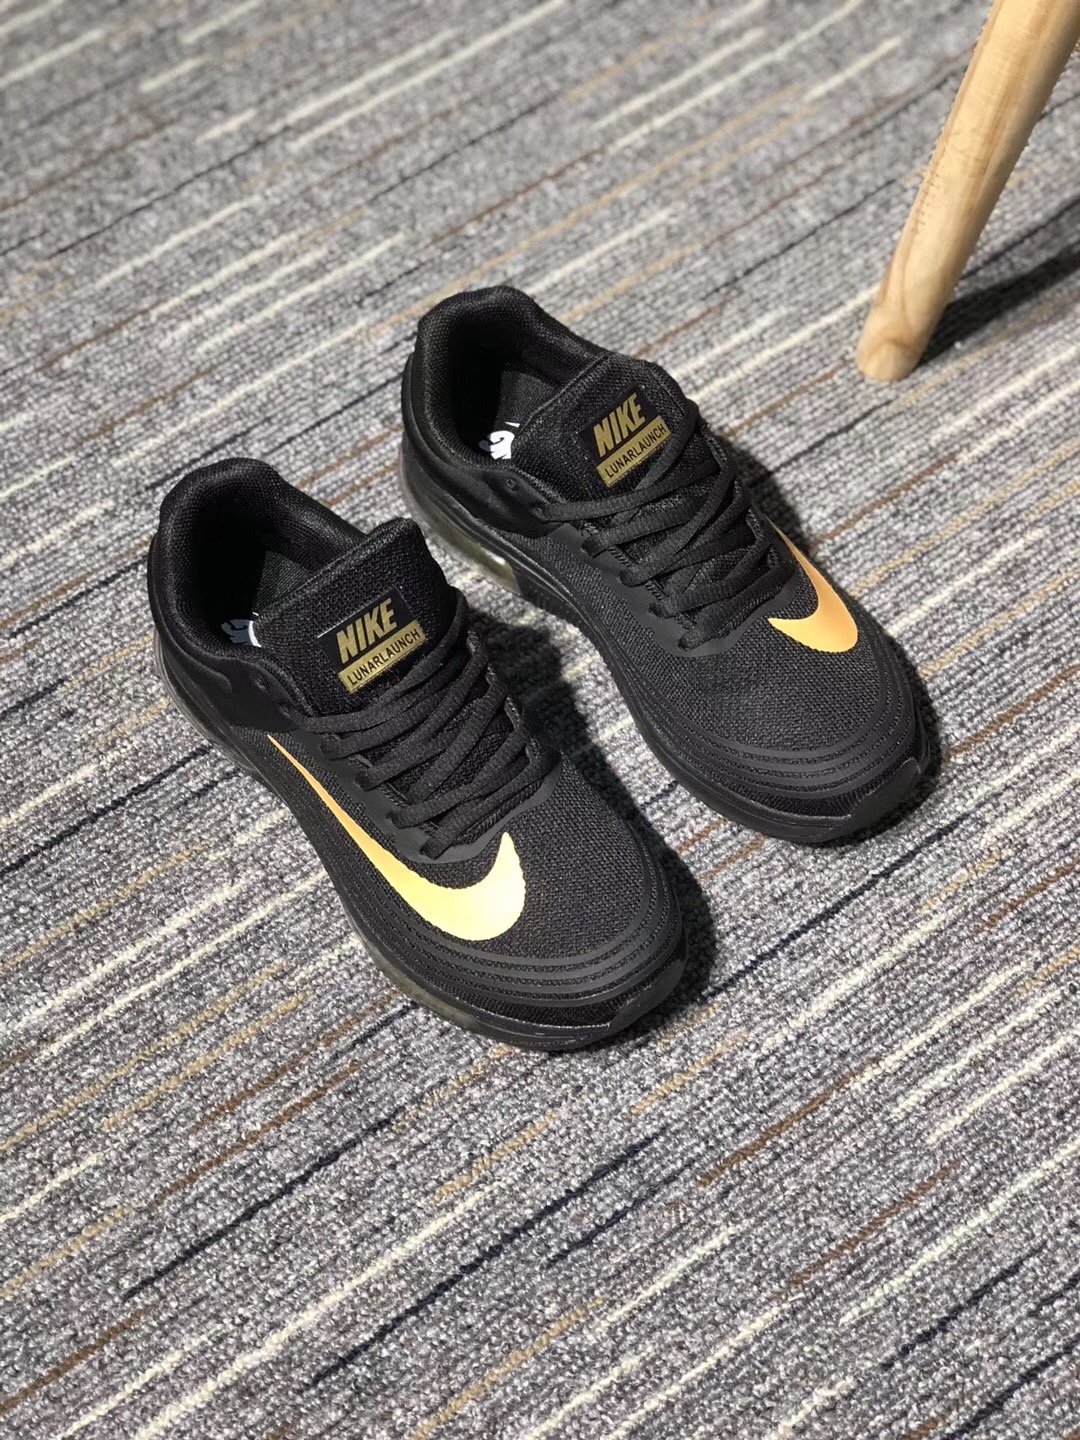 Nike Air Max 2018 Flyknit Black Gold Running Shoes